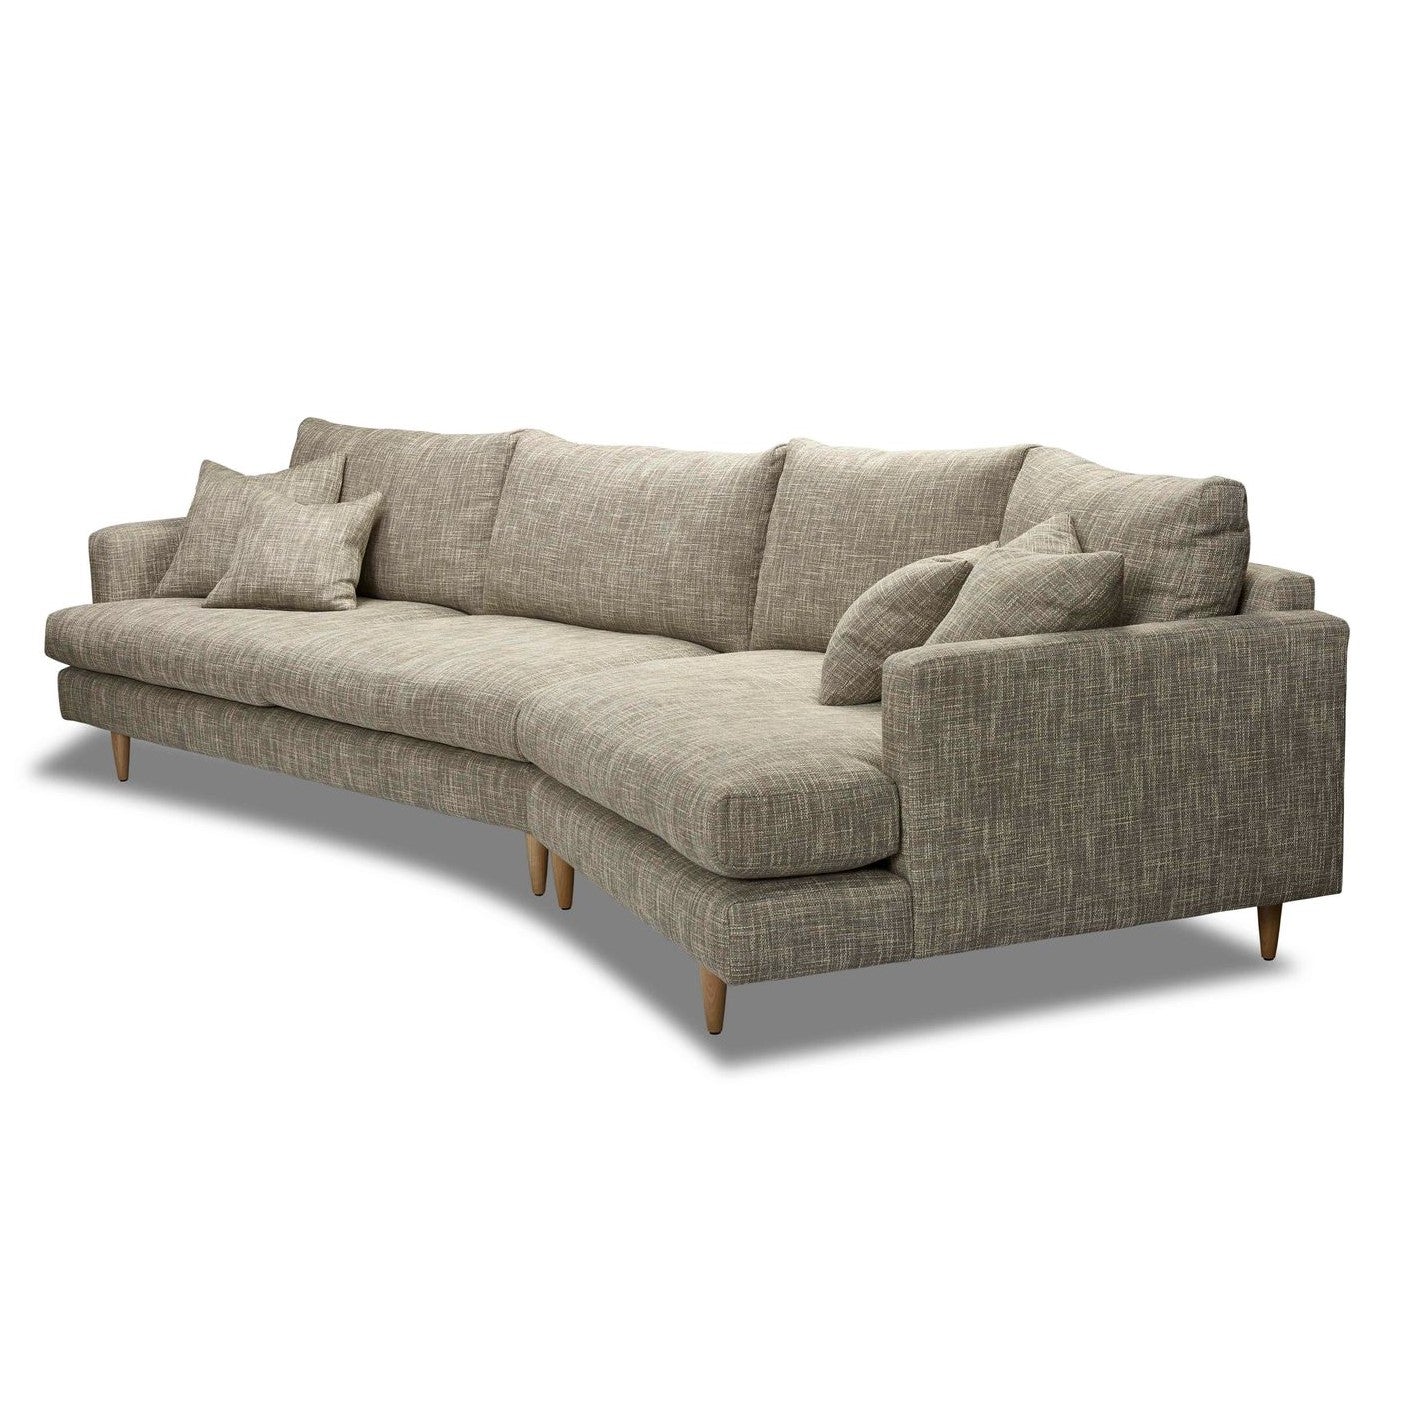 Drifter Modular Sofa by Molmic available from Make Your House A Home, Furniture Store located in Bendigo, Victoria. Australian Made in Melbourne. Cooper Sofa Molmic.